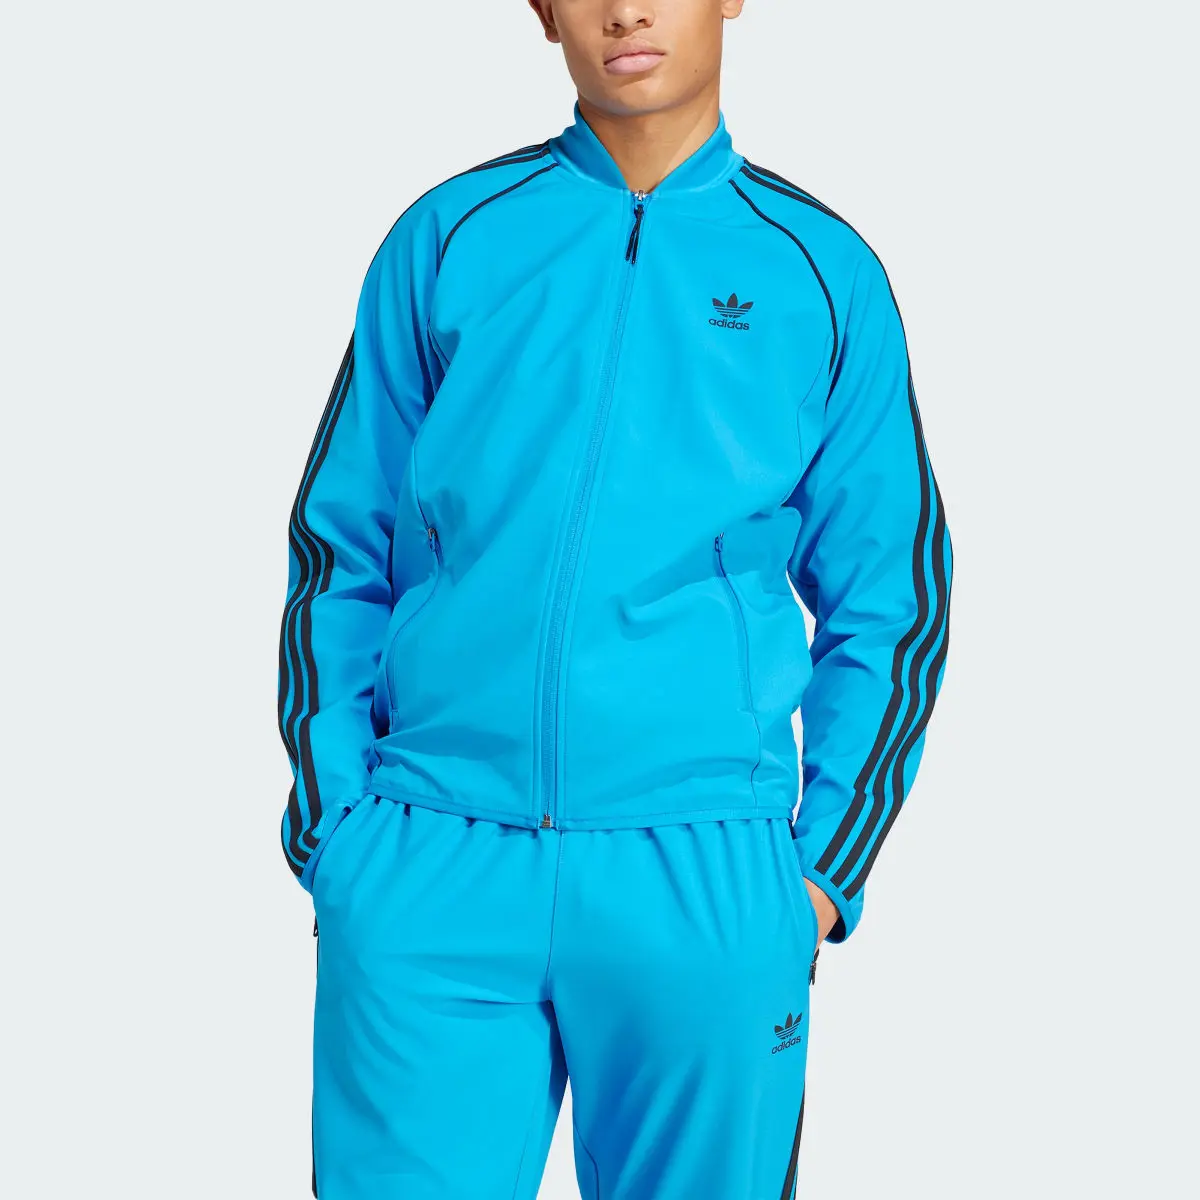 Adidas Track top SST Bonded. 1